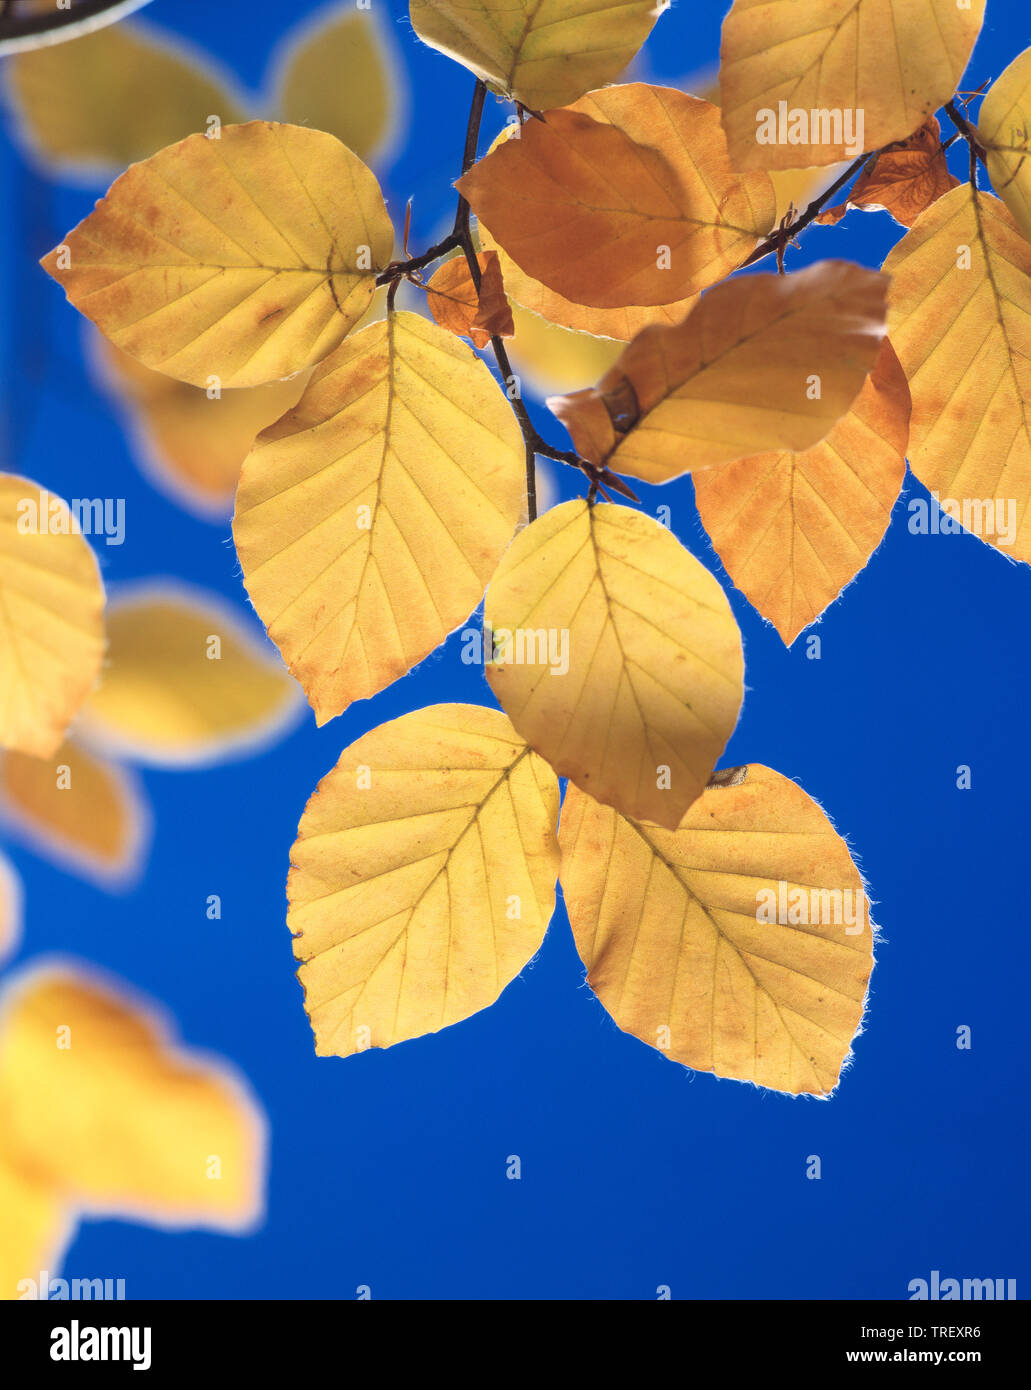 European Beech, Common Beech (Fagus sylvatica). Leaves in autumn colors in backlight. Germany Stock Photo